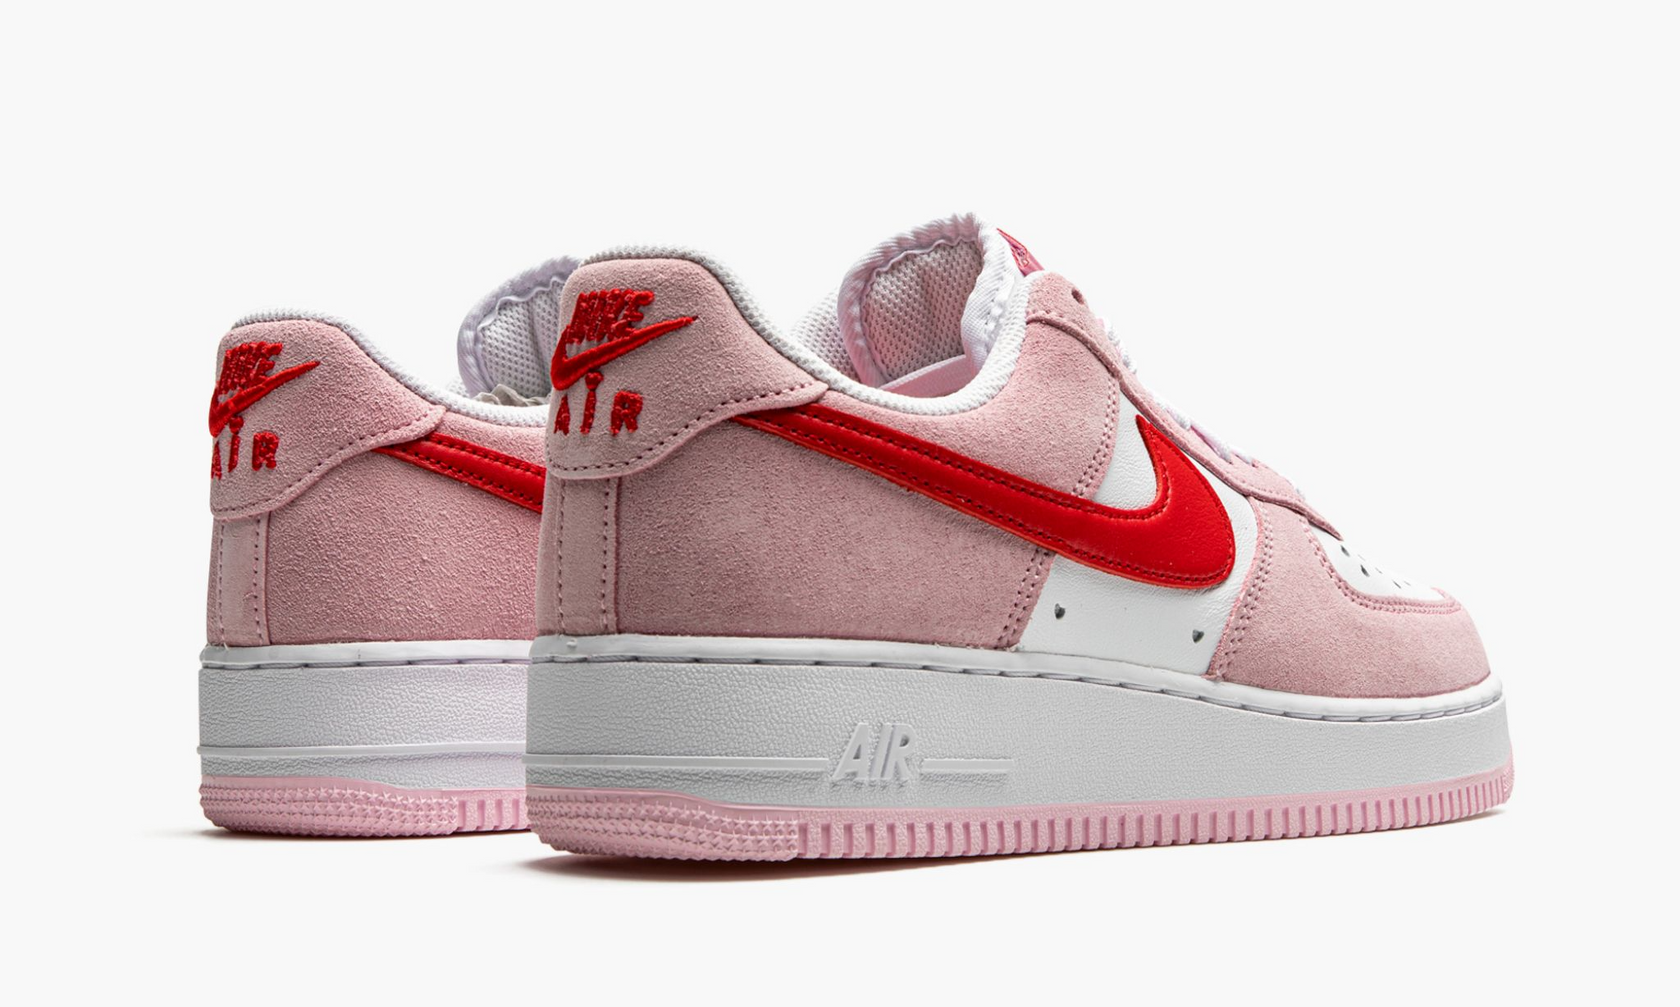 Nike Air Force 1 Low “Valentine’s Day” 2023. Nike Air Force 1 Low Valentines Day. Кроссовки Nike Air Force 1 Low Valentine's Day. Nike Air Force 1 Low 07 Valentine's Day.